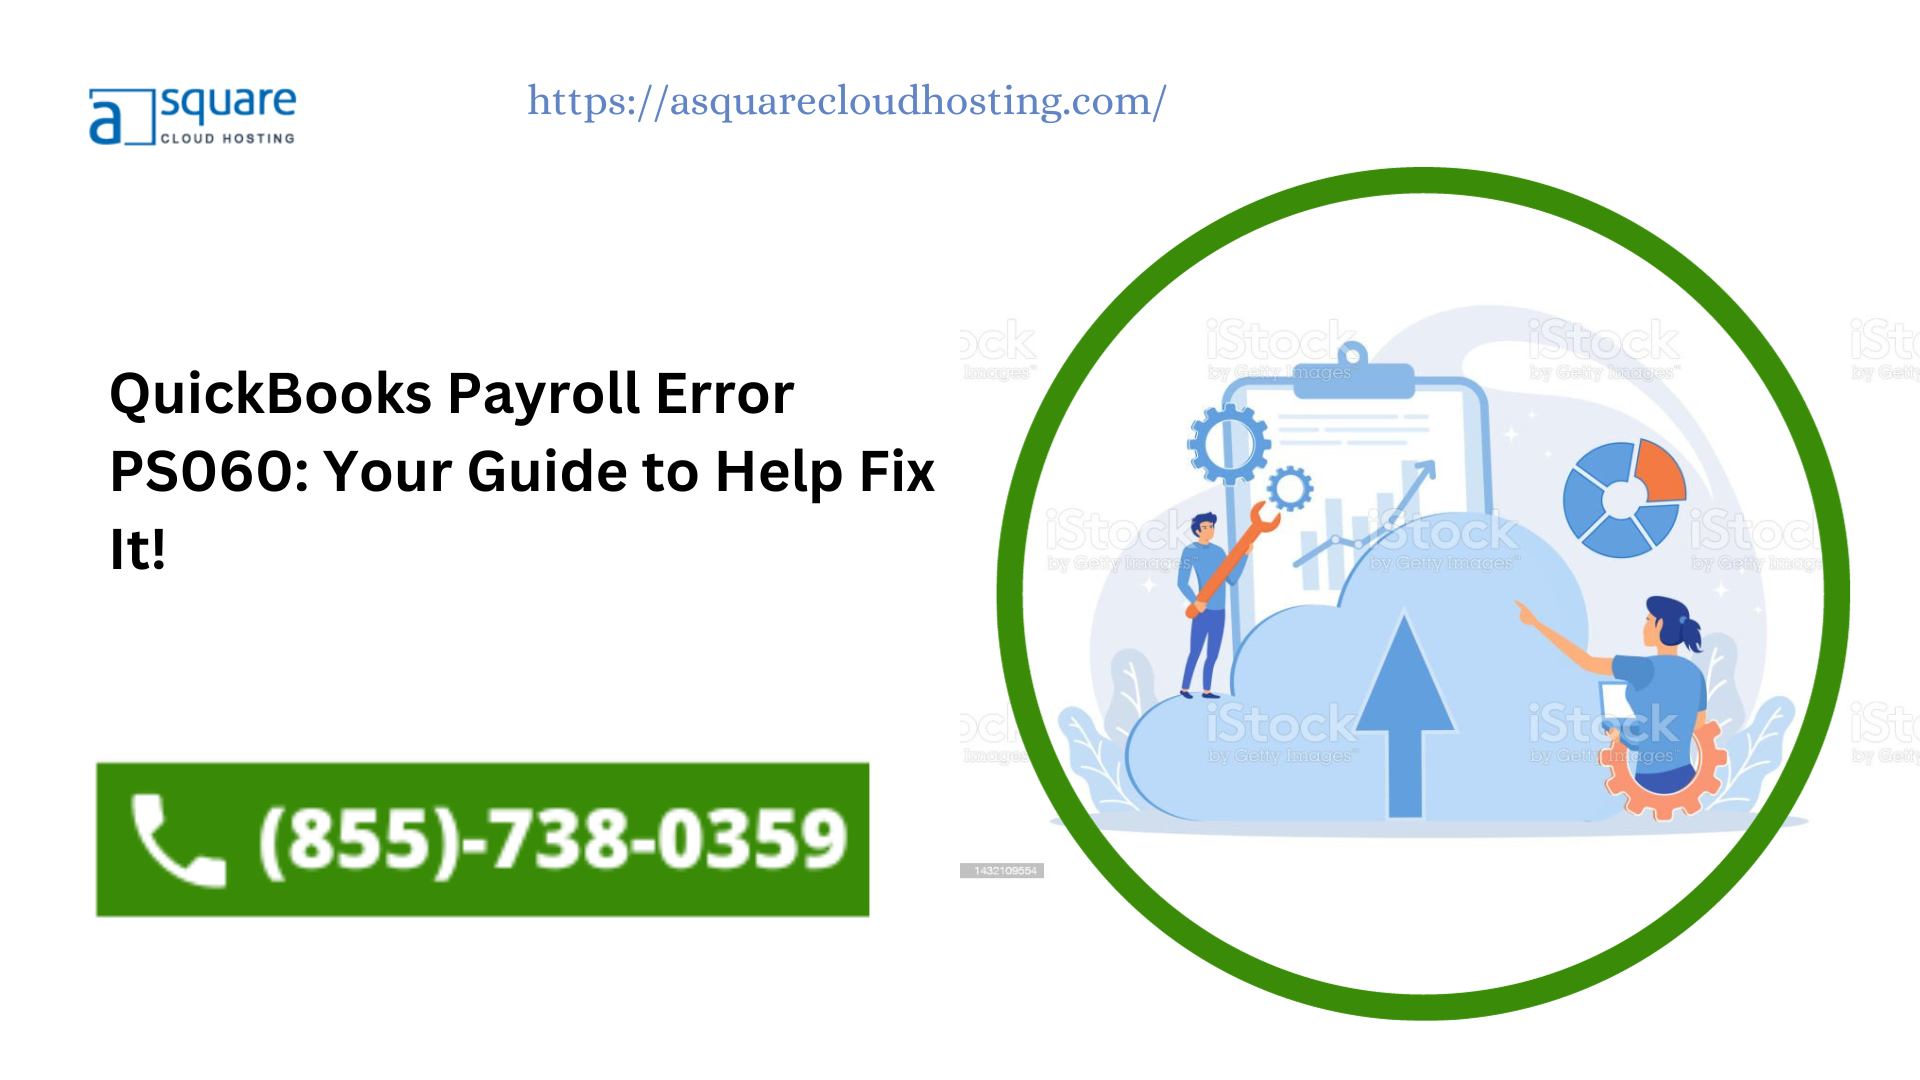 QuickBooks Payroll Error PS060: Your Guide to Help Fix It!